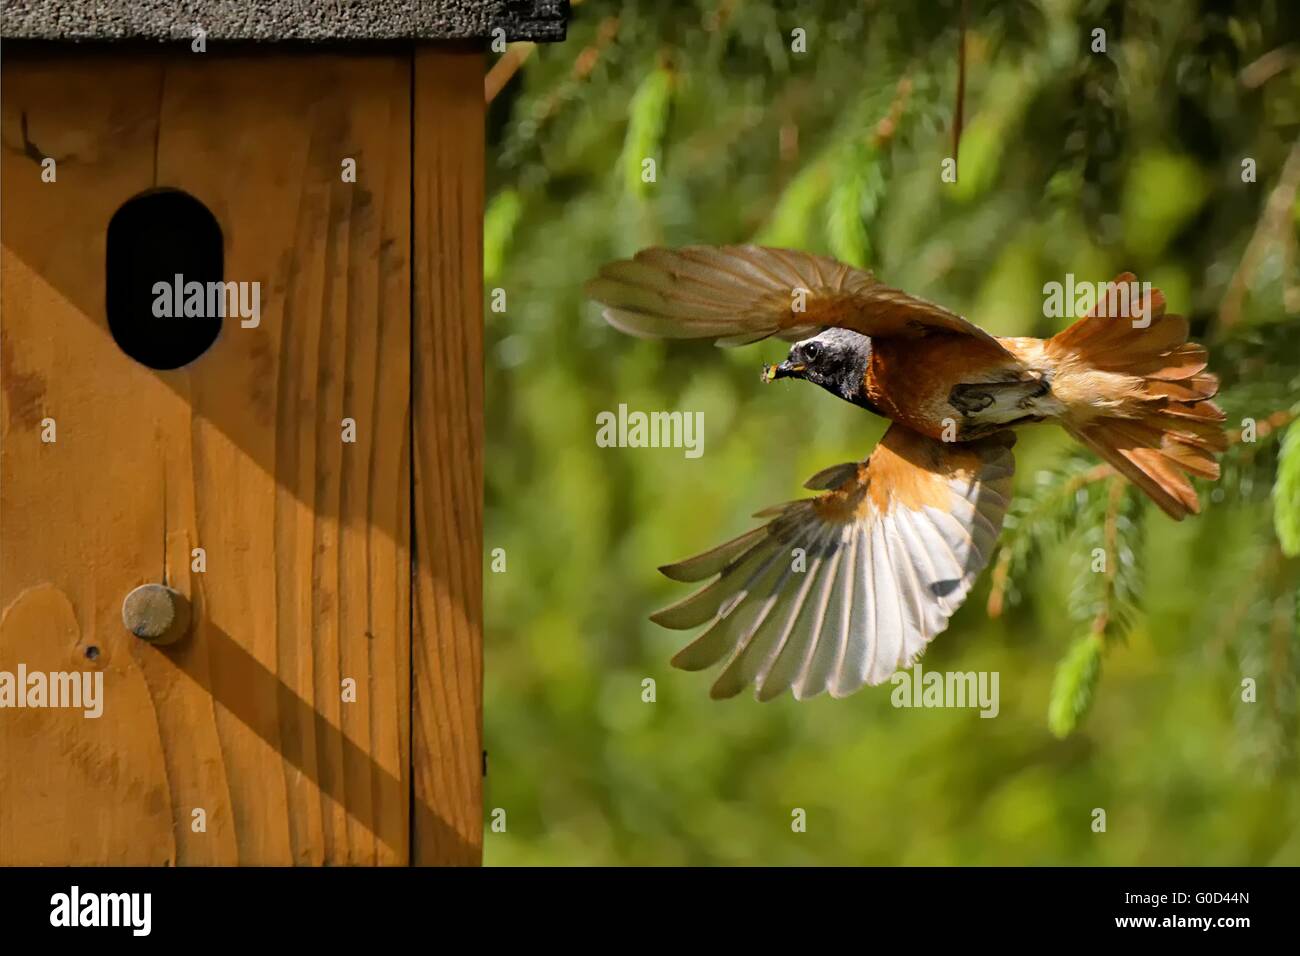 Common redstart at the nestbox Stock Photo